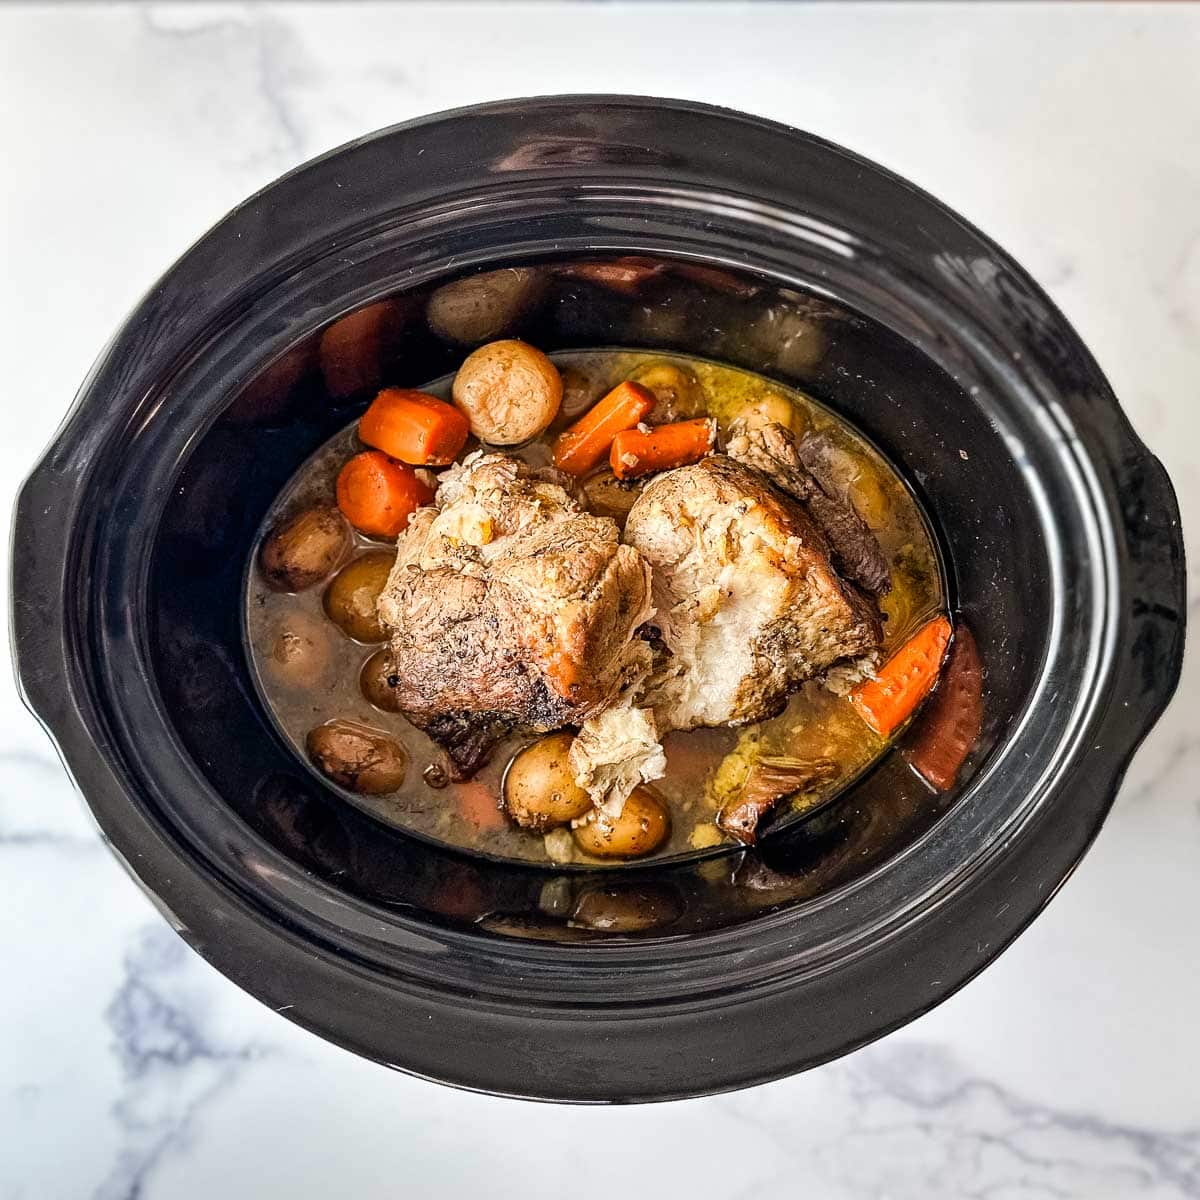 A crock pot containing a fully cooked Italian slow cooker pork roast, potatoes, and carrots.